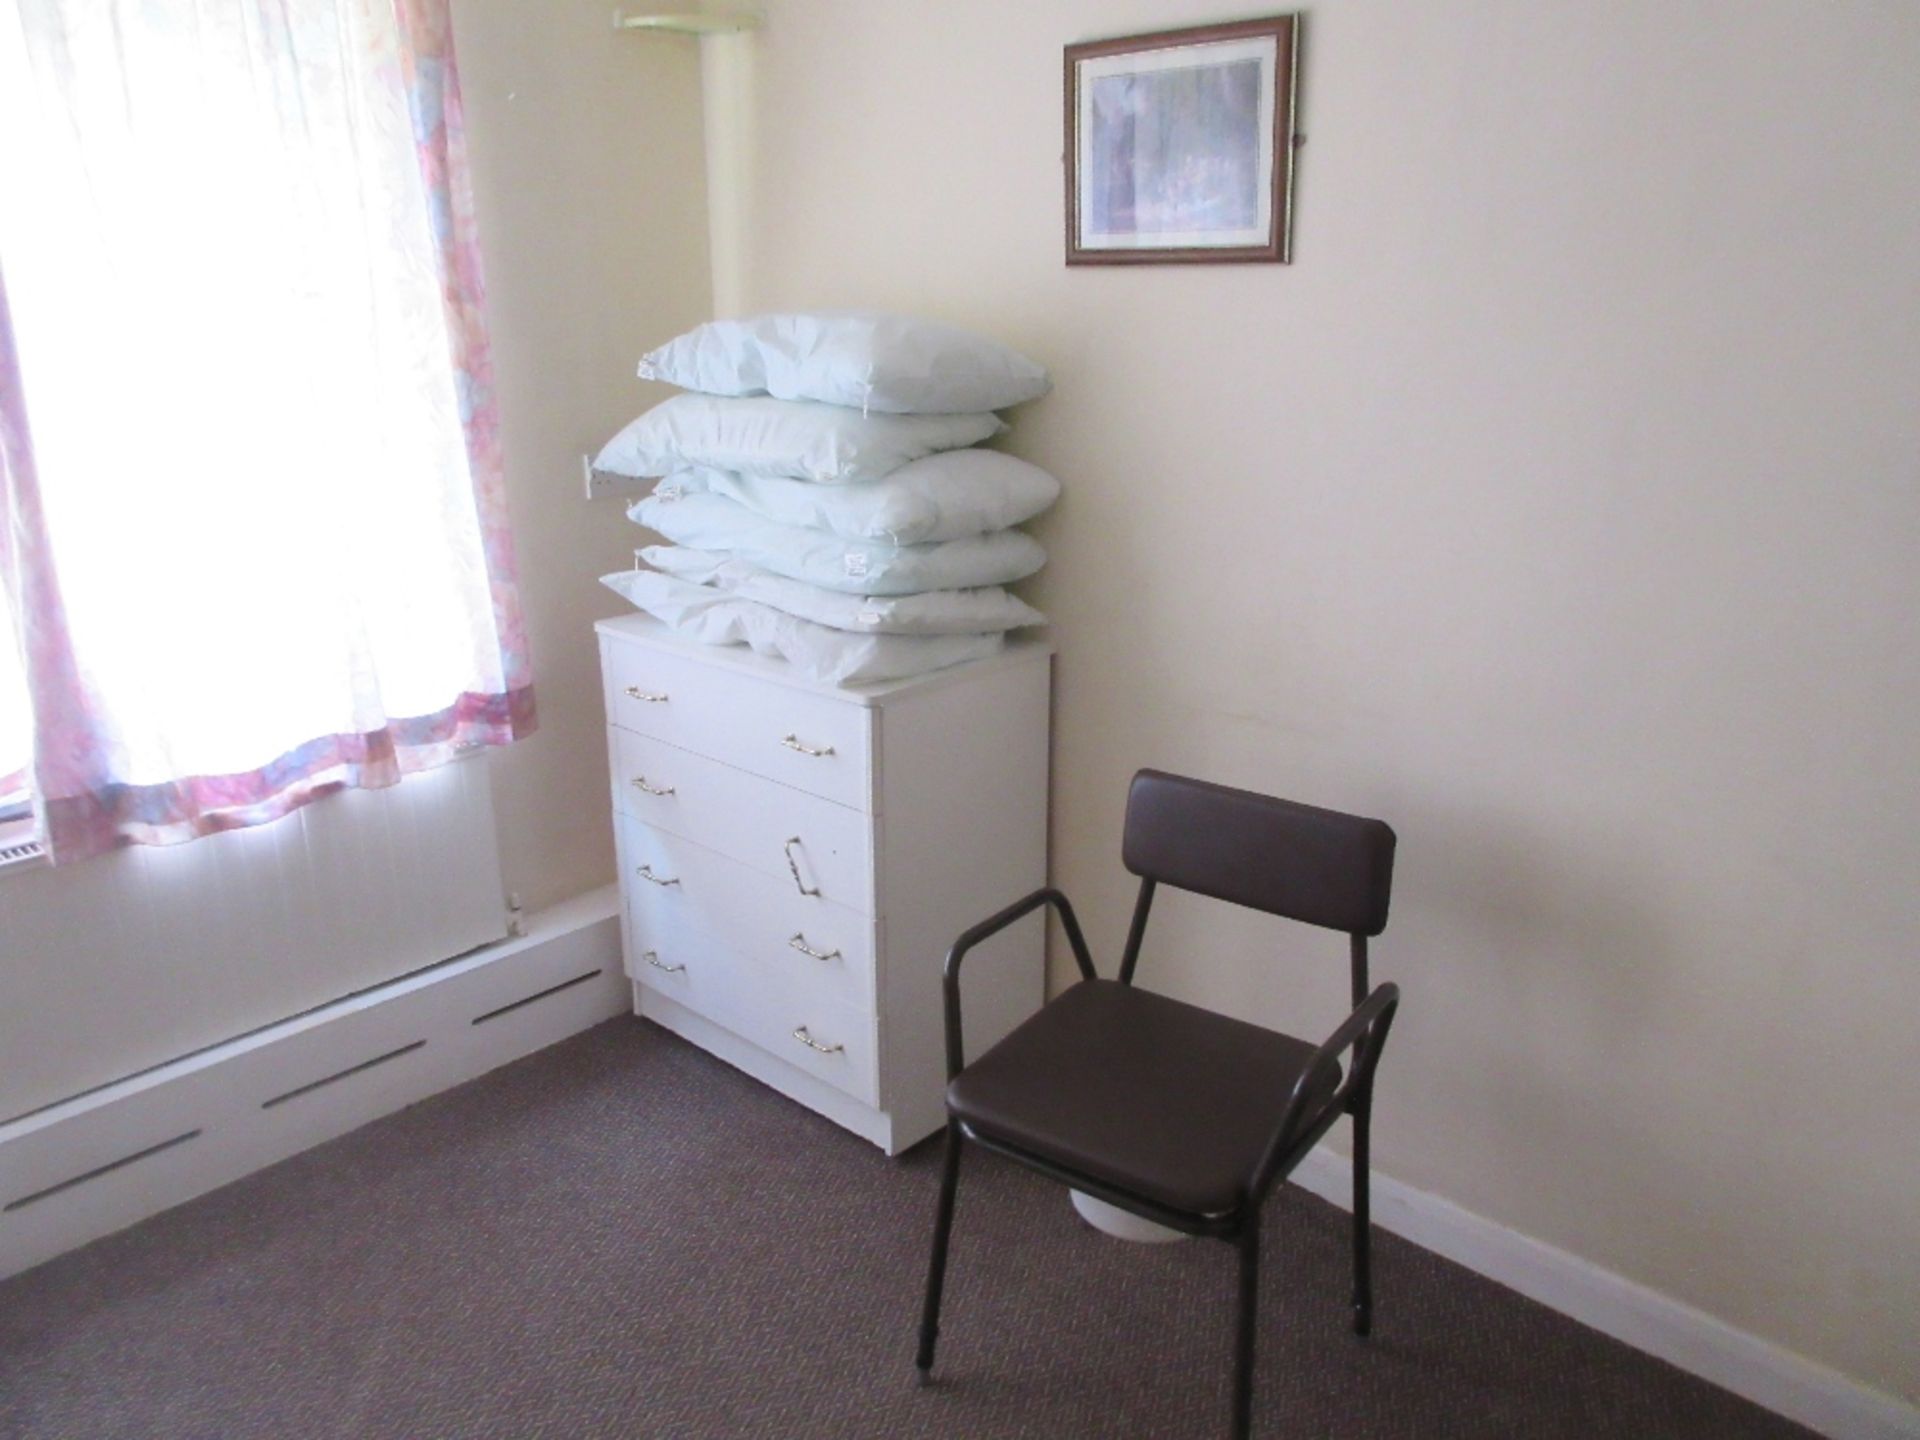 Contents of room 27 to include: 4 chest of drawers, commode and remaining items and 8 folding